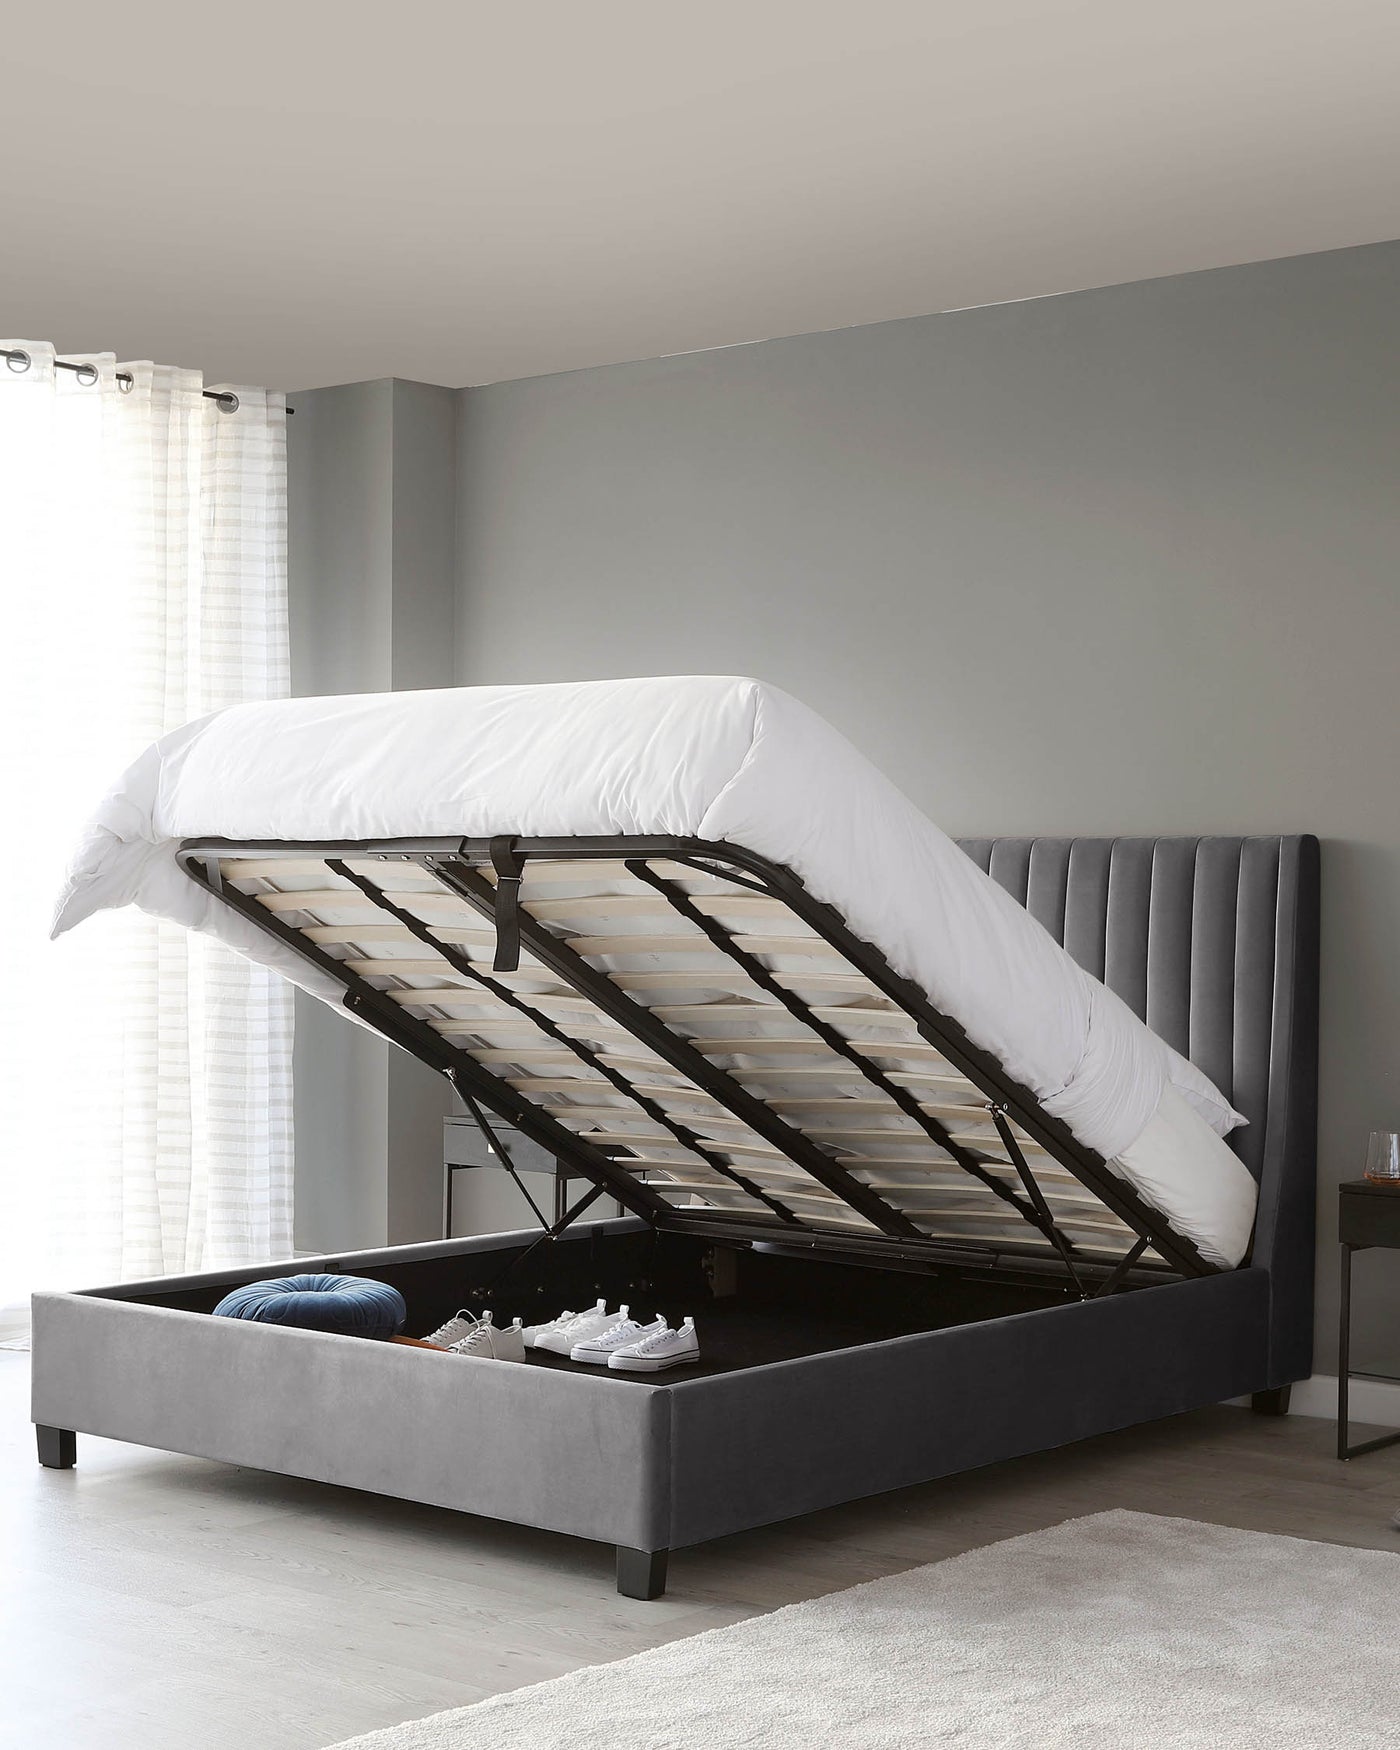 A contemporary-style grey upholstered storage bed with a lifting frame to reveal an under-bed storage compartment. The bed features a tufted headboard with vertical stitching and a low-profile platform design, supported by dark wooden legs. A mattress is partly lifted to show the wooden slat support system and items stored underneath, including pillows and sneakers.